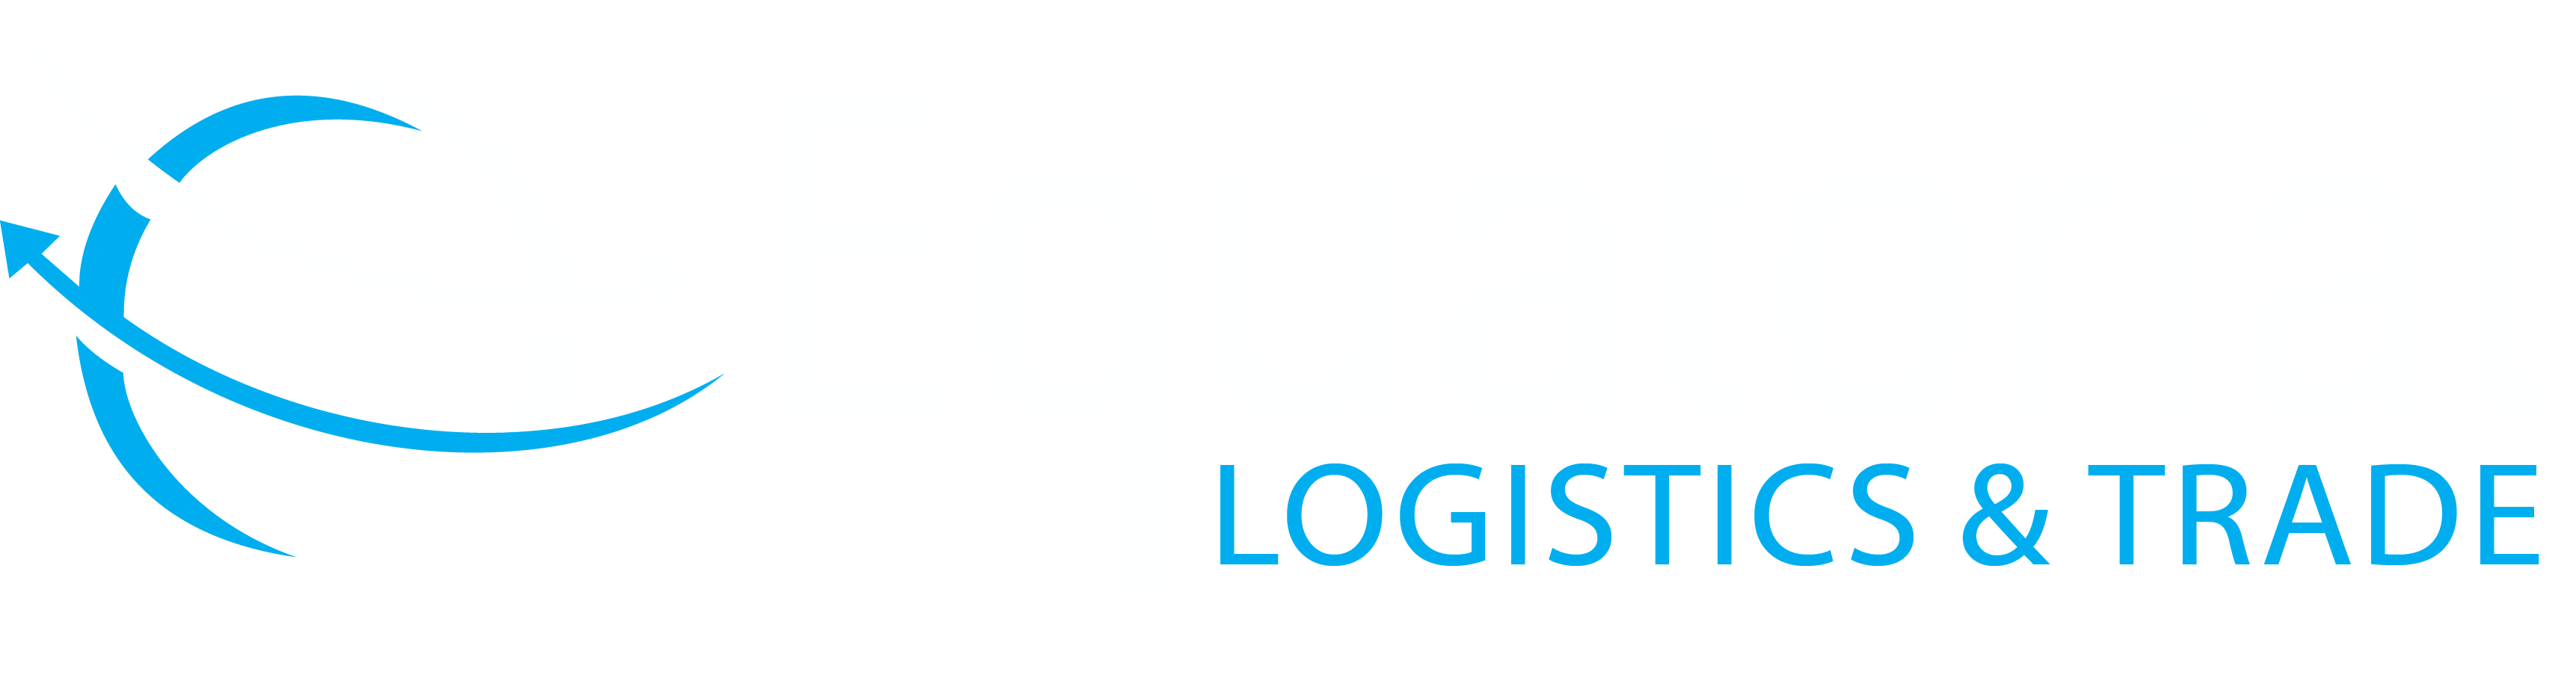 equatorial-logistics-cyan-and-white-1.png